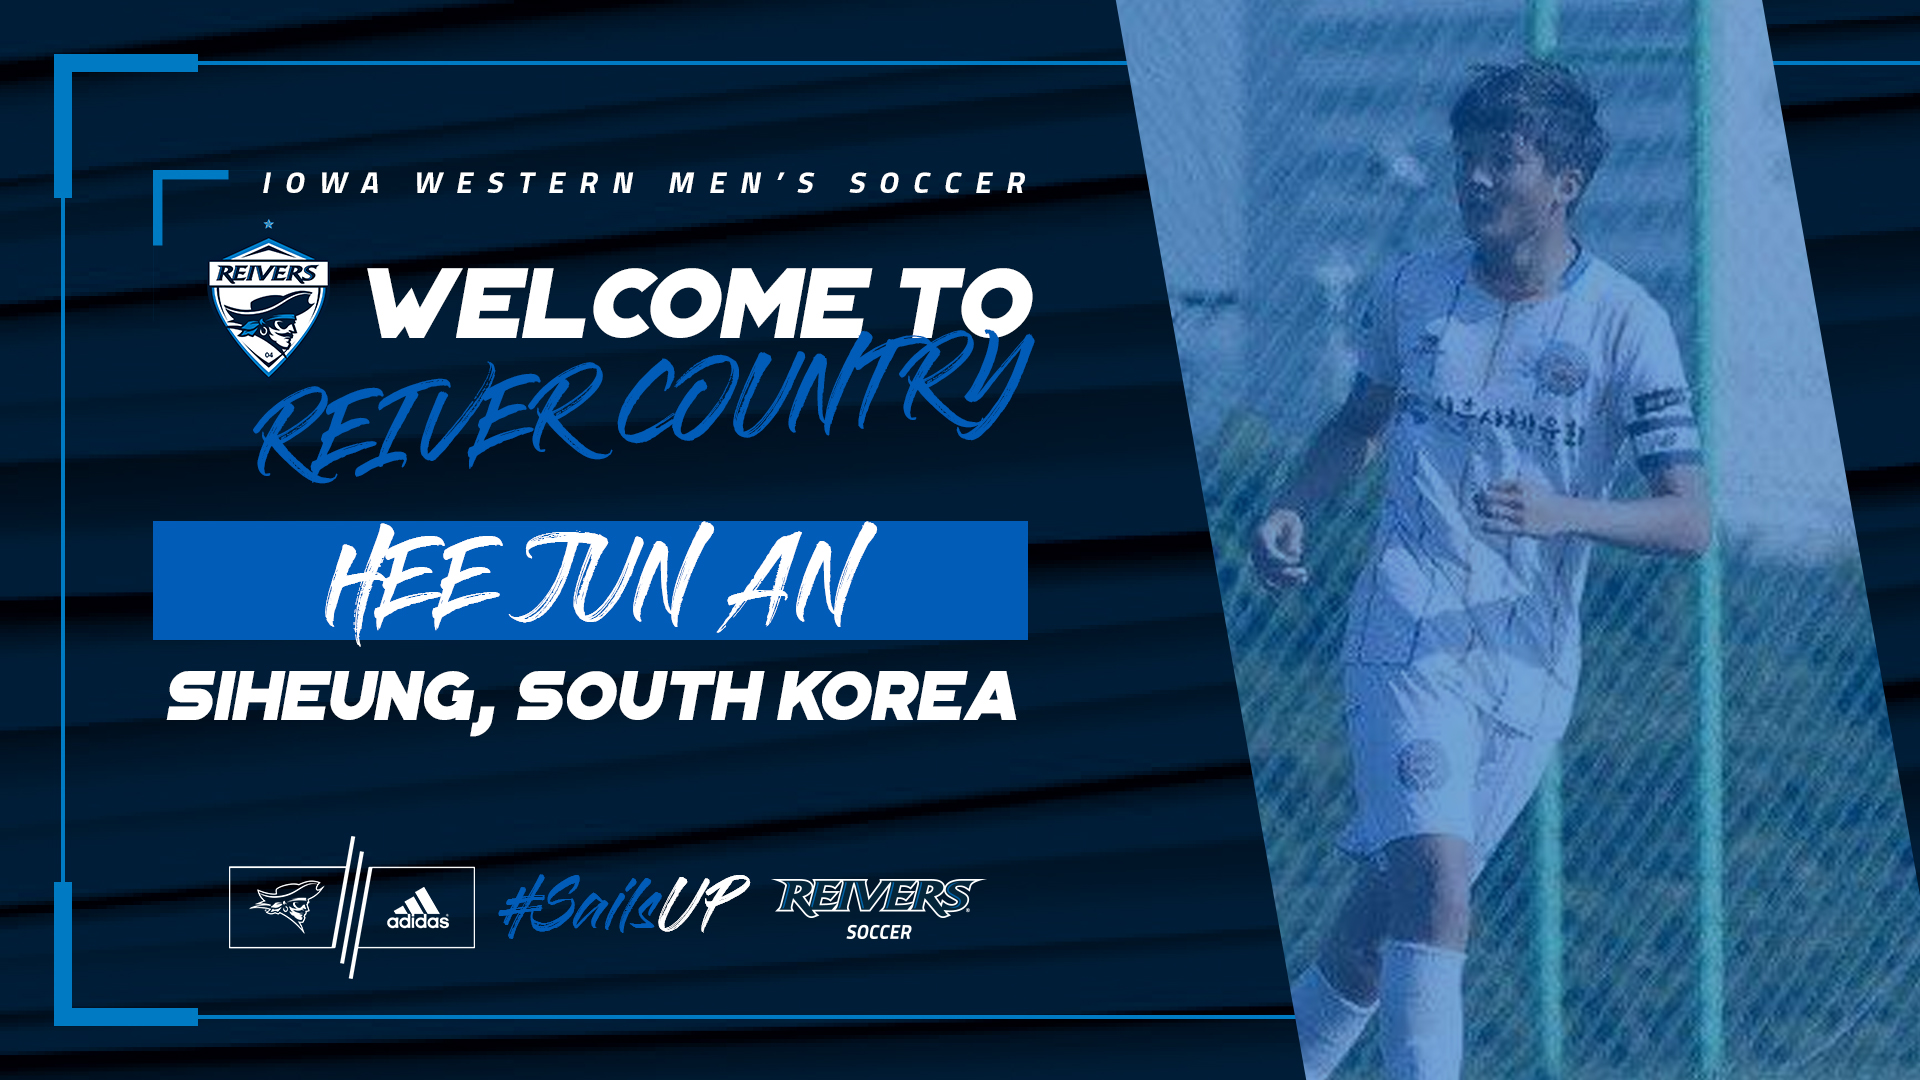 Reiver men's soccer adds Hee Jun An to roster for 2019